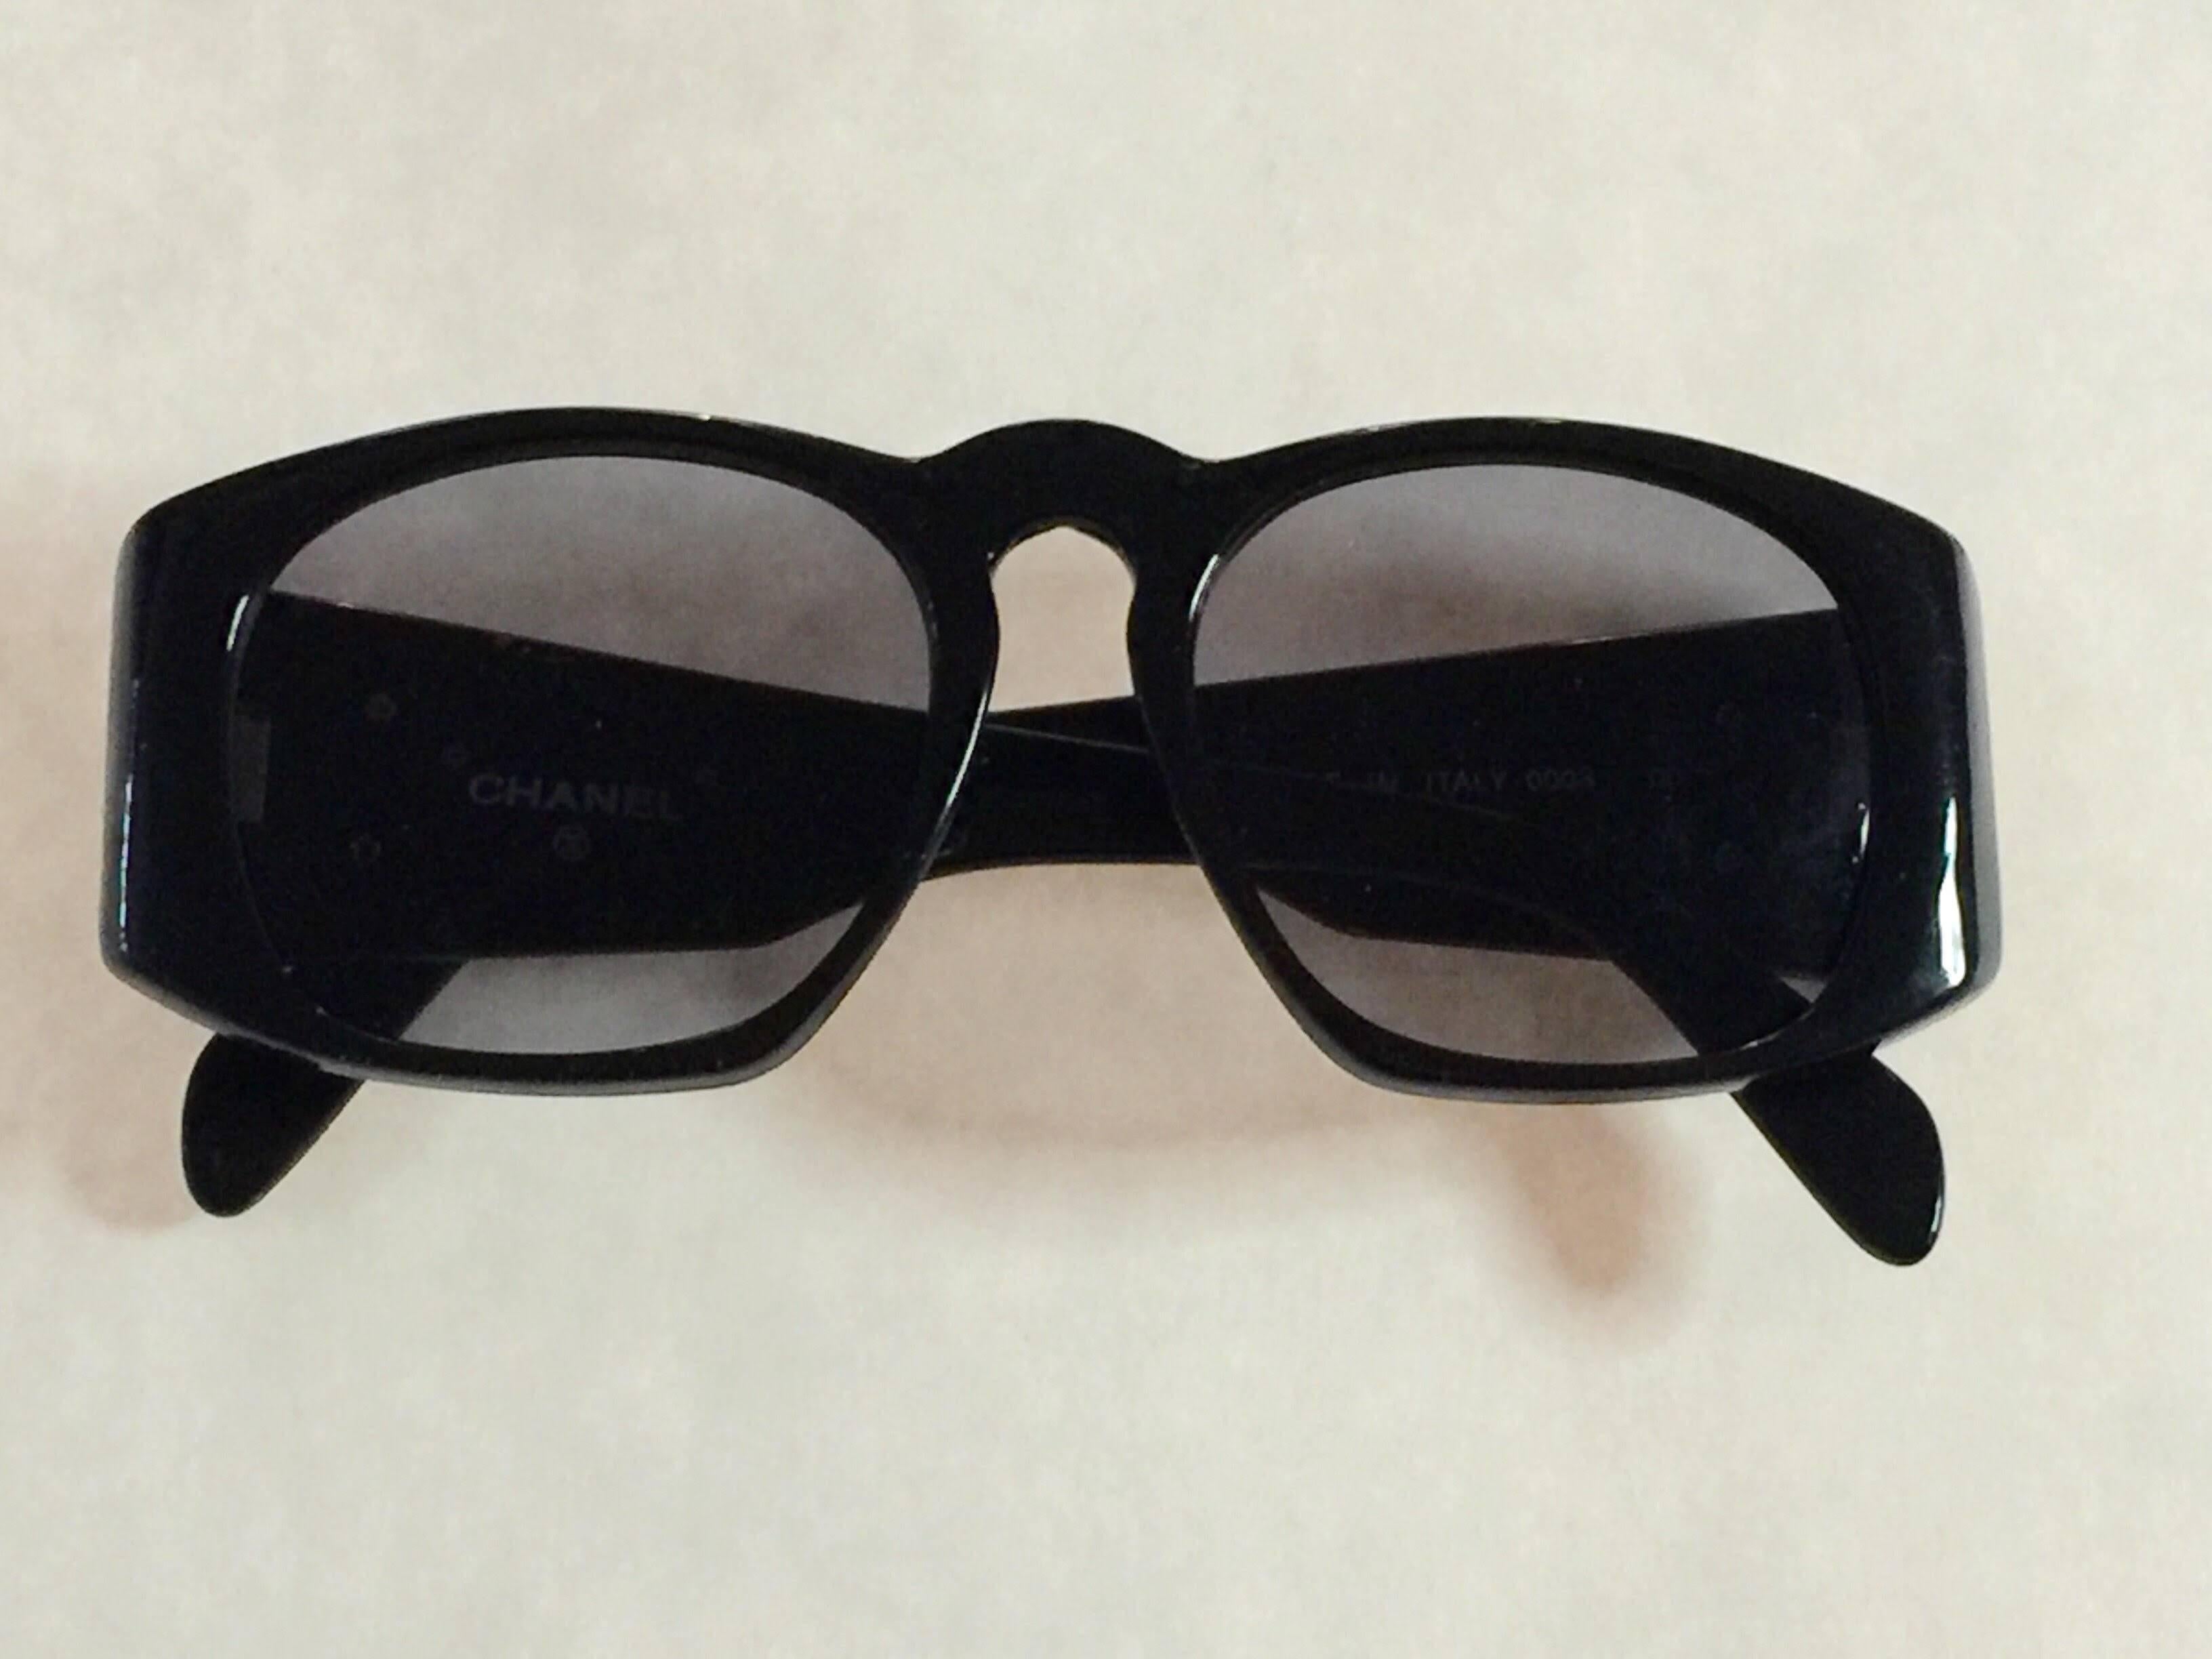 No wardrobe should be without these Classic Black Quilted Plastic CHANEL CC Sunglasses. Marked with appropriate signature as well as visible CC logo, this elegant fashion eyewear quotes the classic black quilted patent leather purses which this